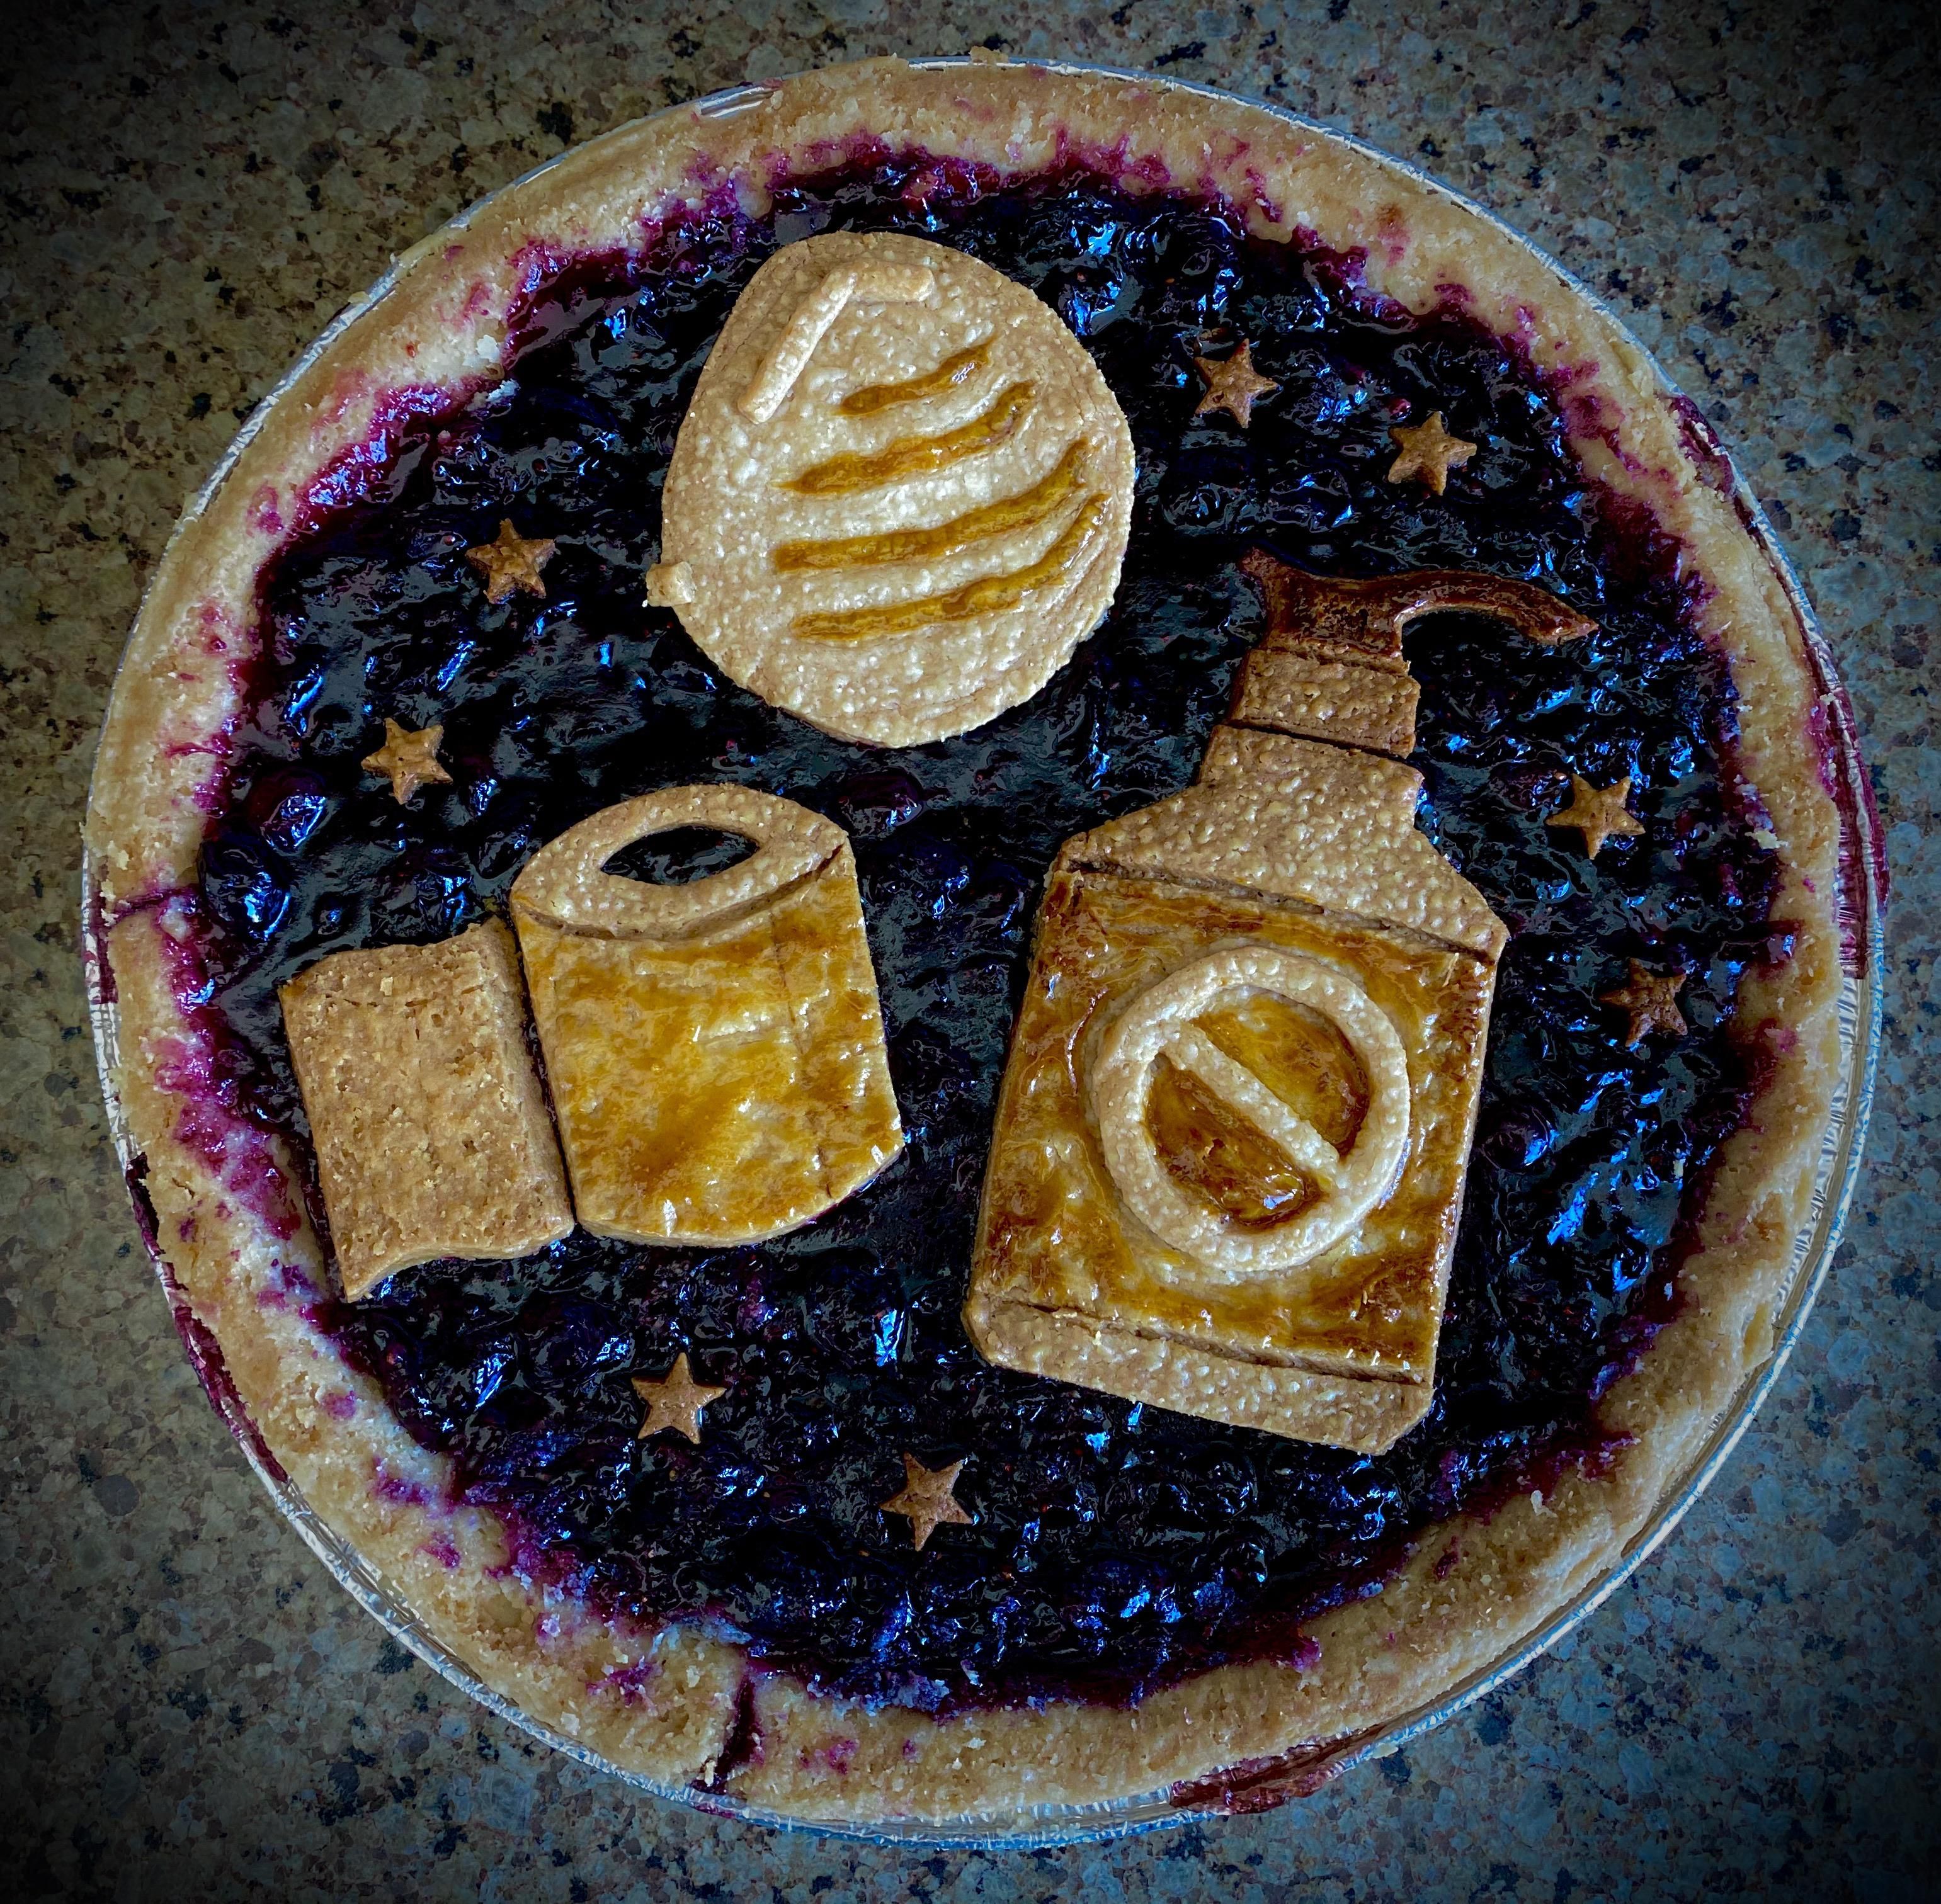 Late submission for pi-day because it took forever to find everything